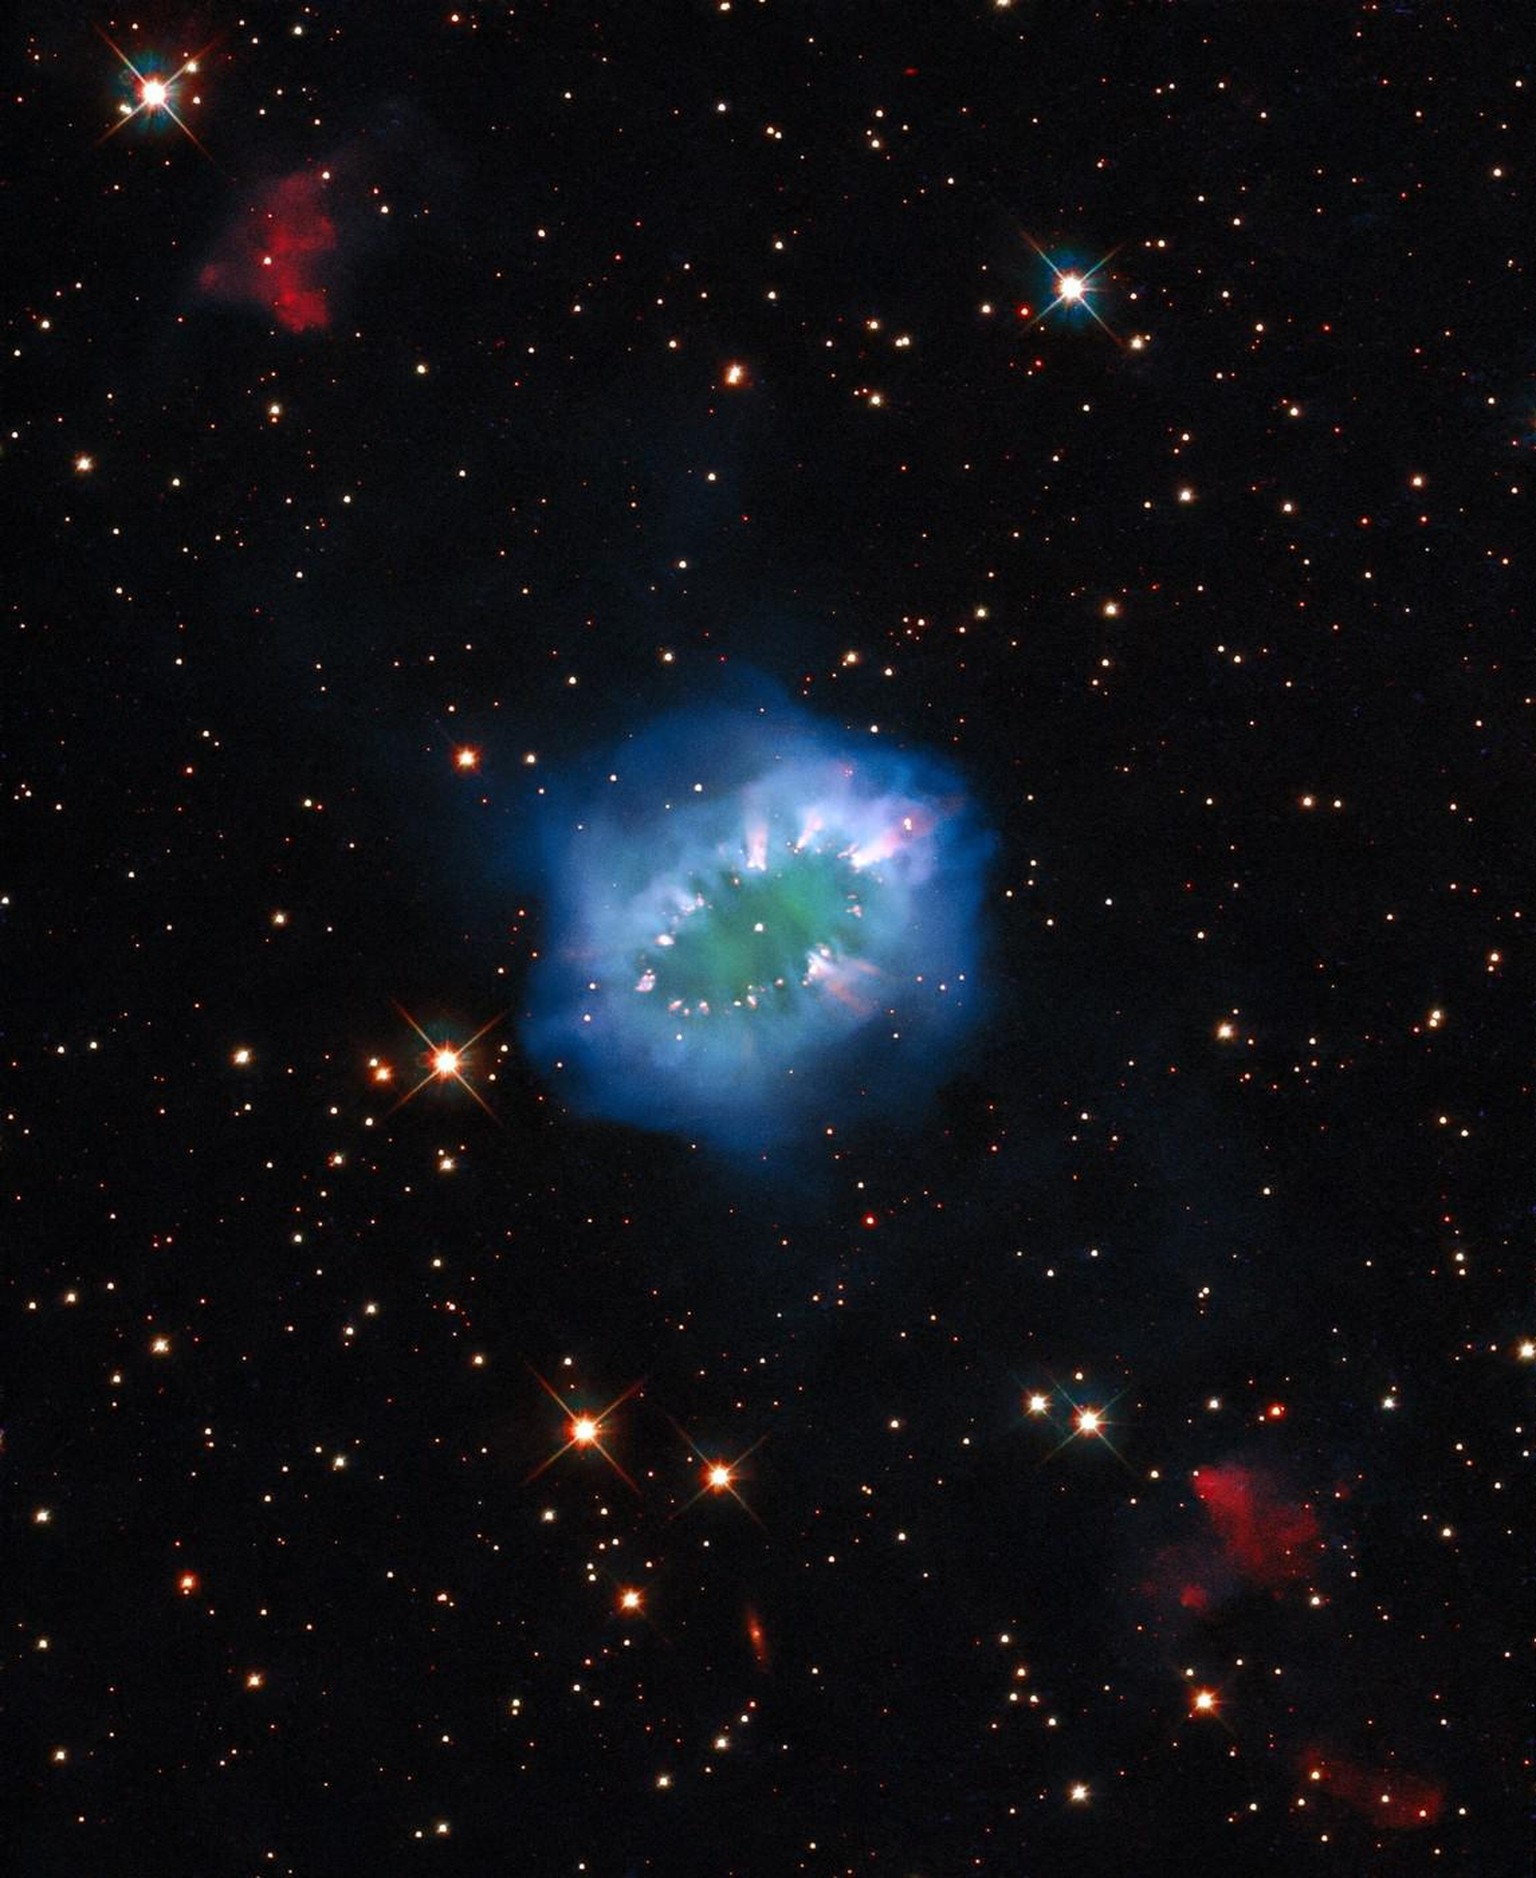 The interaction of two doomed stars has created this spectacular ring adorned with bright clumps of gas — a diamond necklace of cosmic proportions. Fittingly known as the Necklace Nebula, this planeta ...